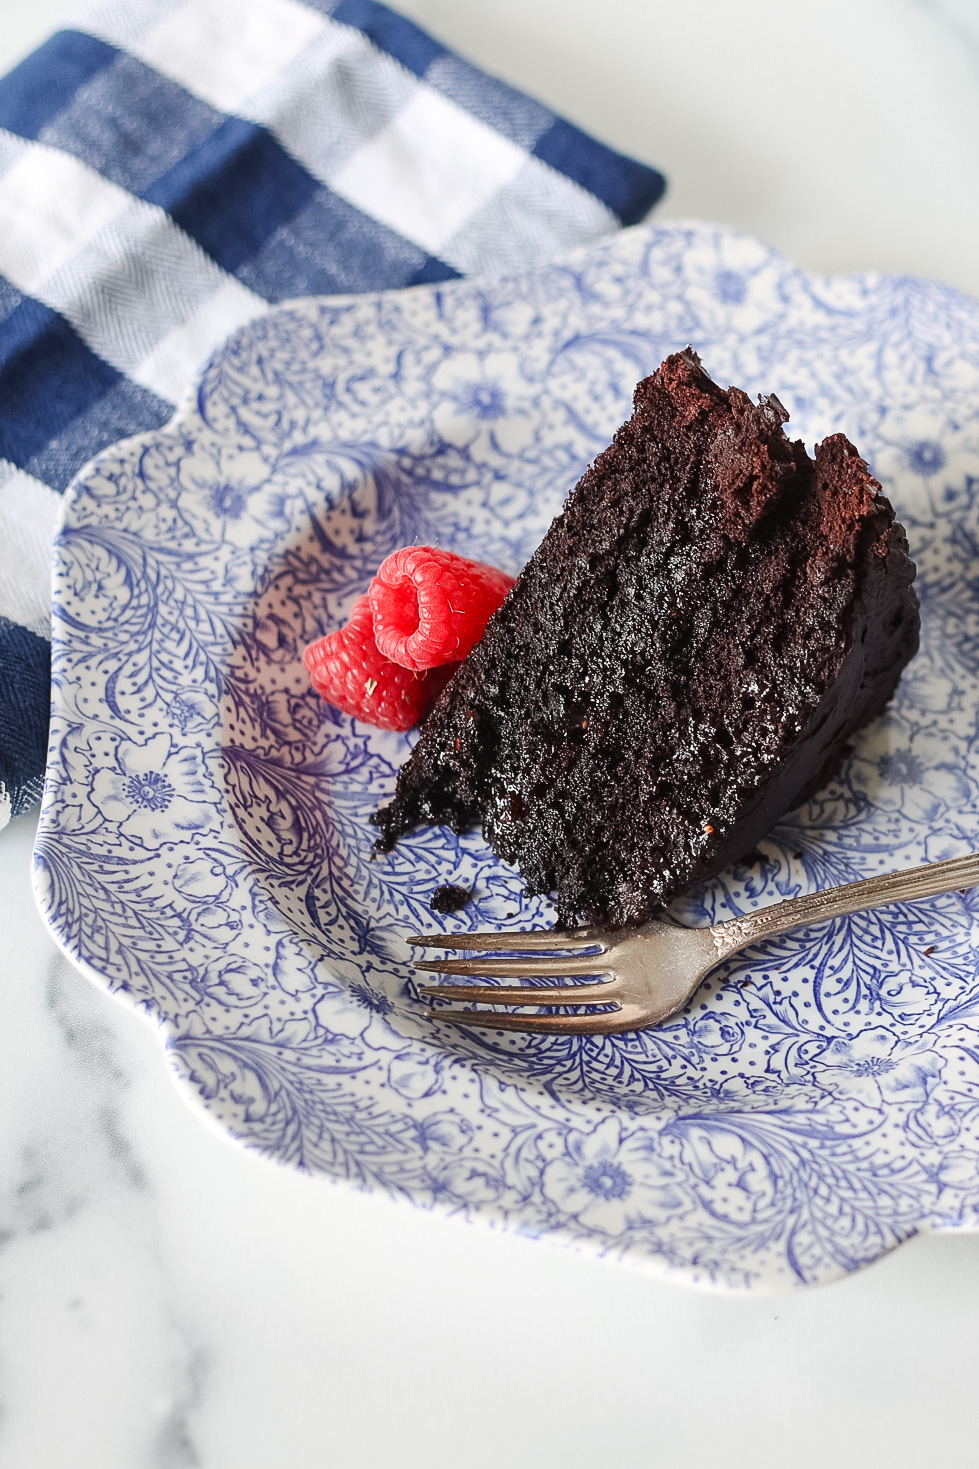 dark chocolate cake slice on blue and white floral plate with raspberries on plate